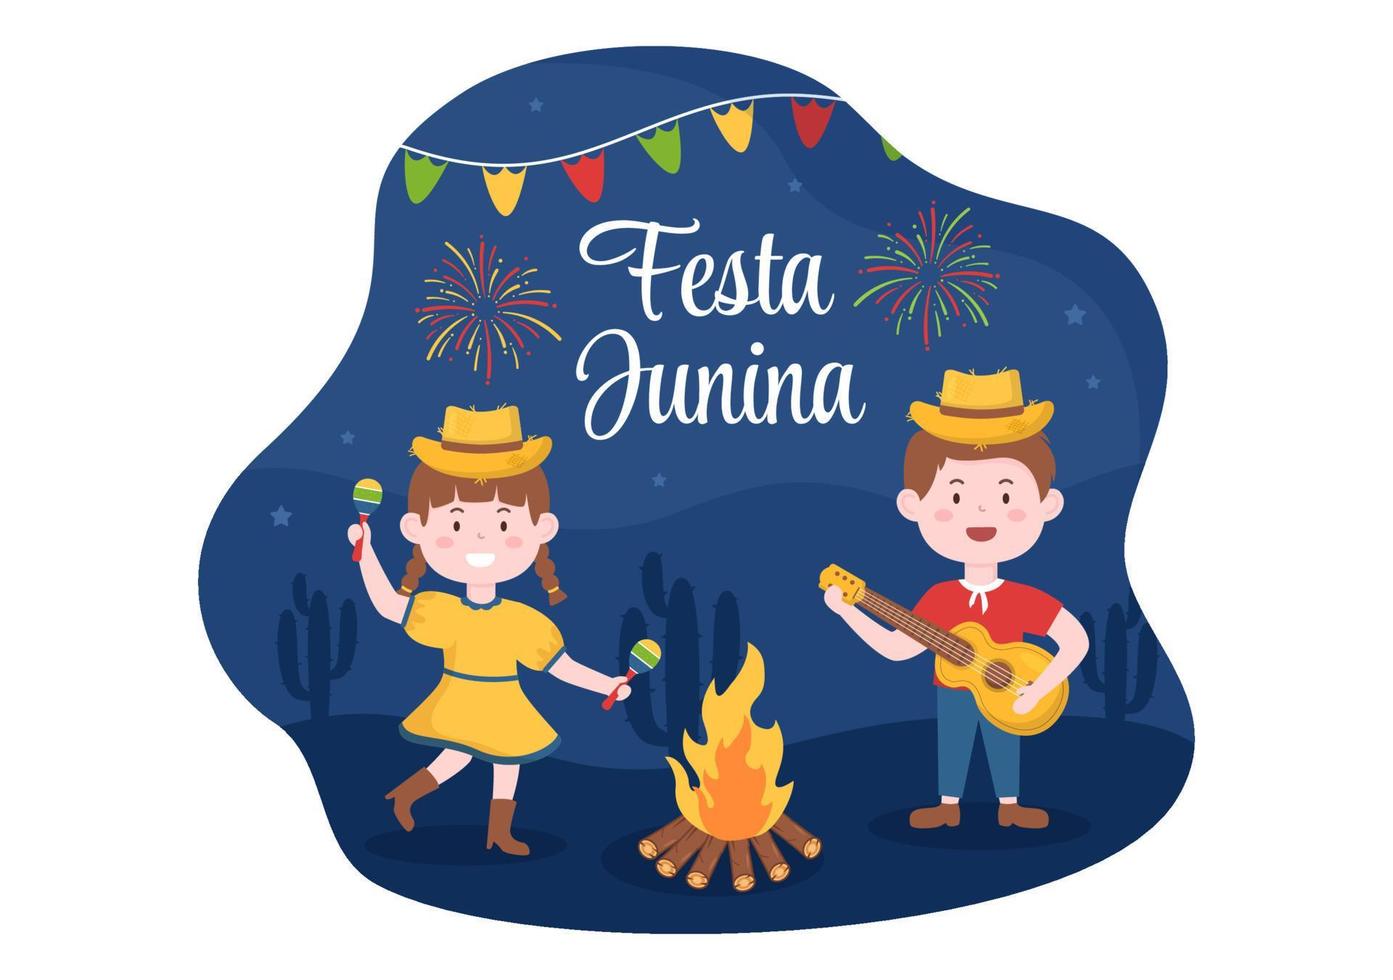 Festa Junina or Sao Joao Celebration Cartoon Illustration Made Very Lively by Singing, Dancing Samba and Playing Traditional Games Come From Brazil vector